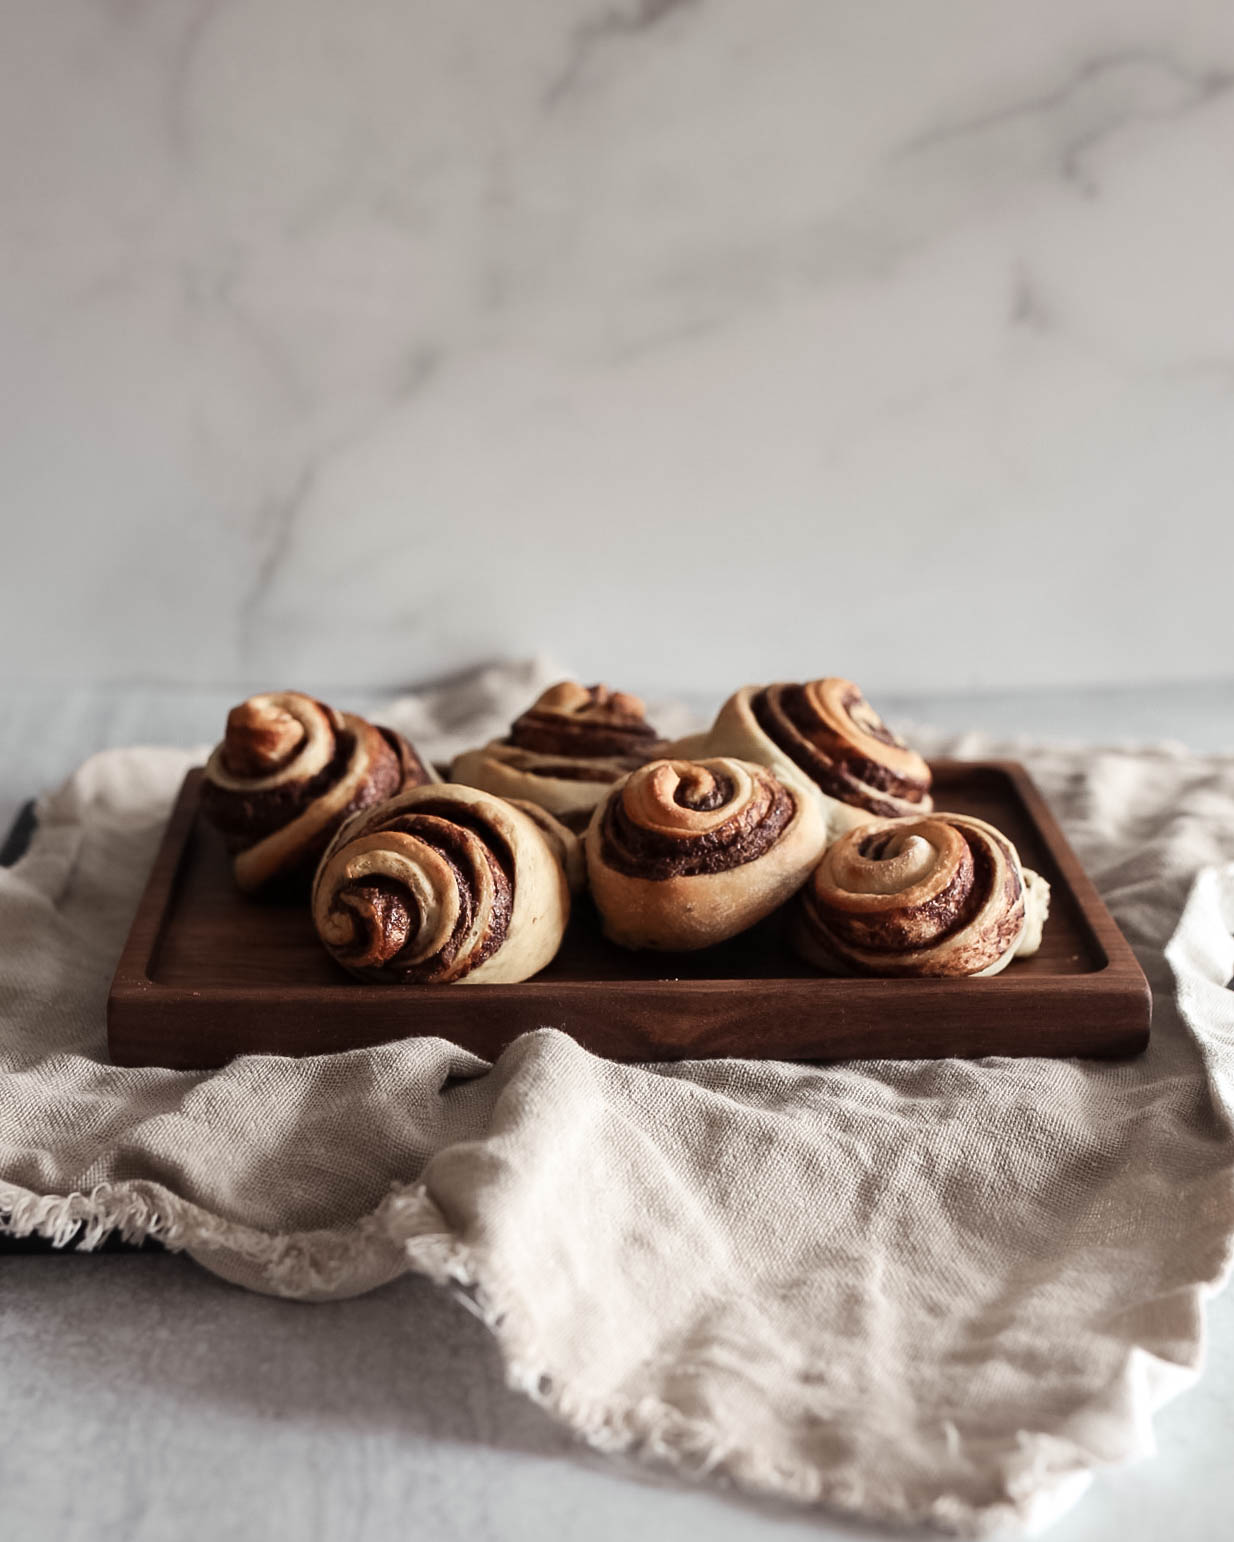 Small Batch Banana Sweet Rolls with Nutella